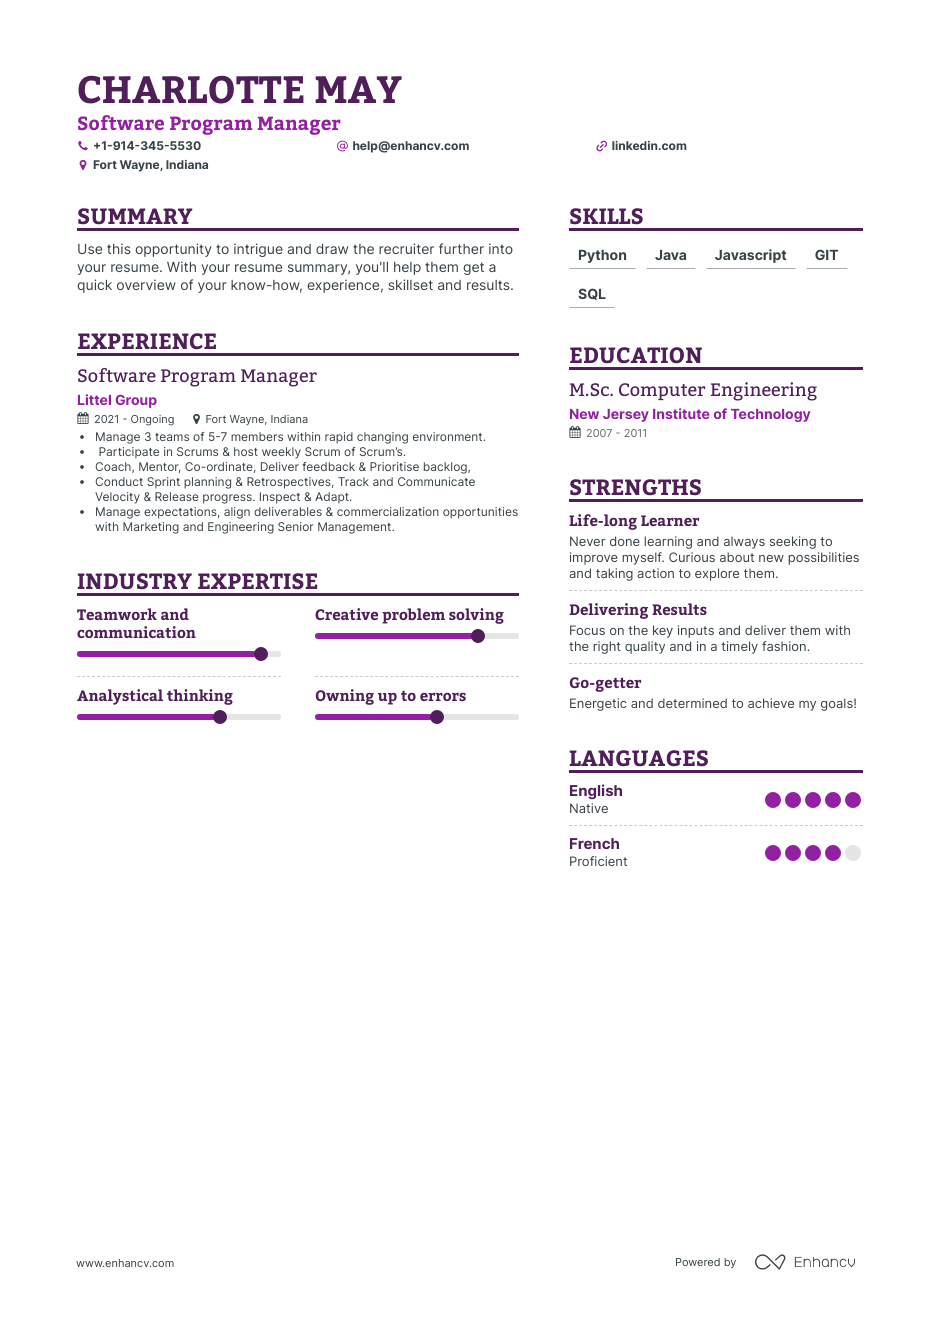 Software Program Manager resume example